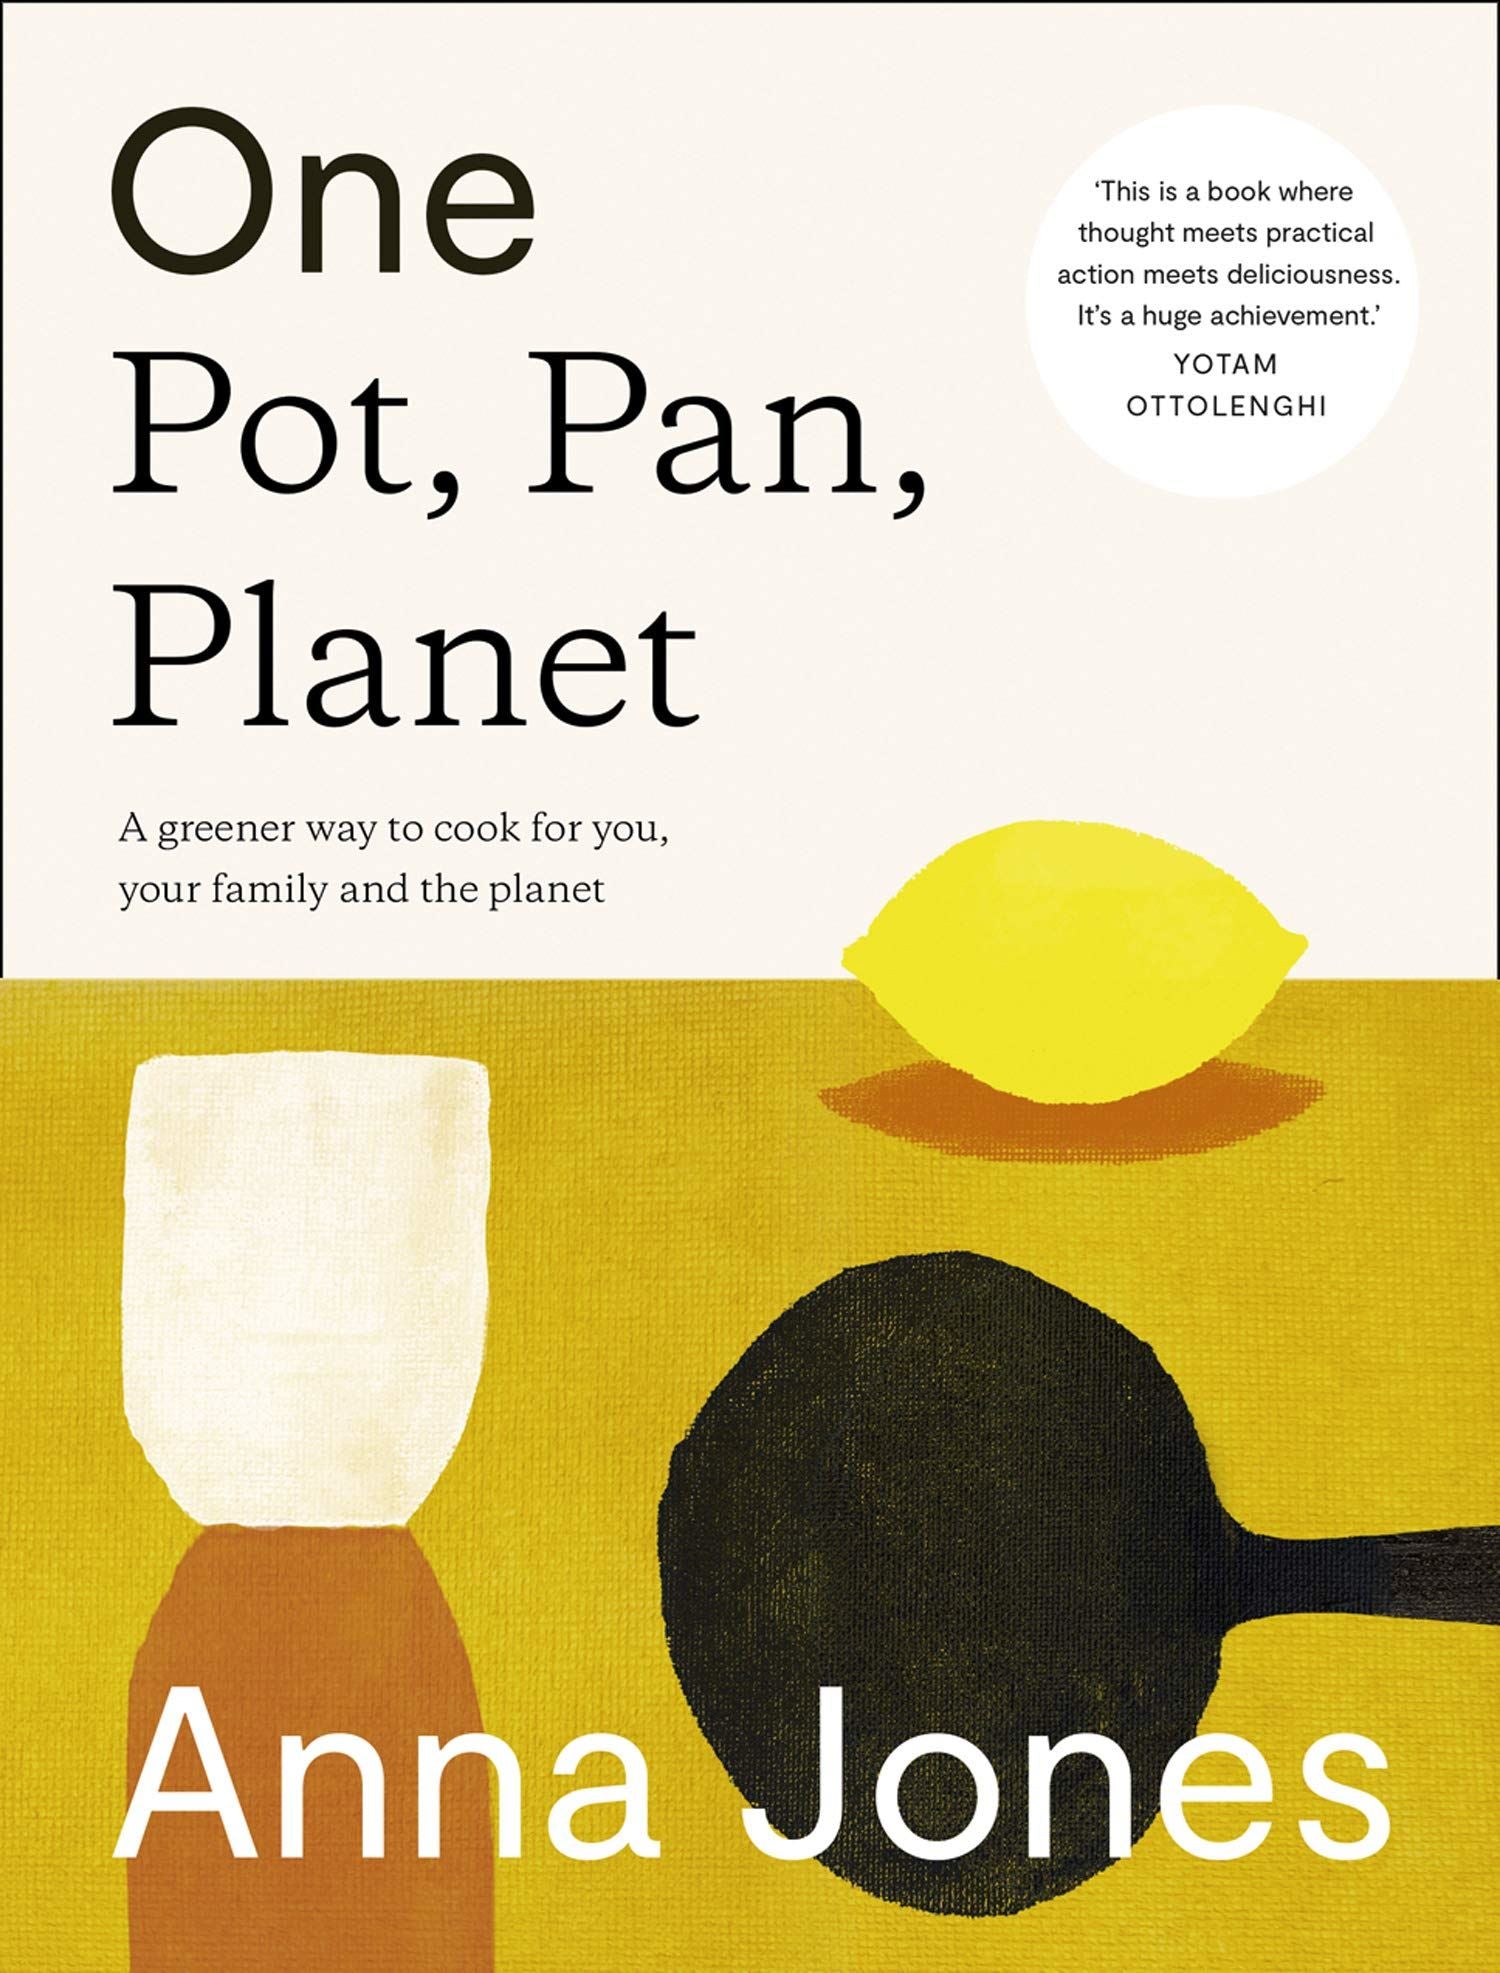 One Pot, Pan, Planet Cookery Book